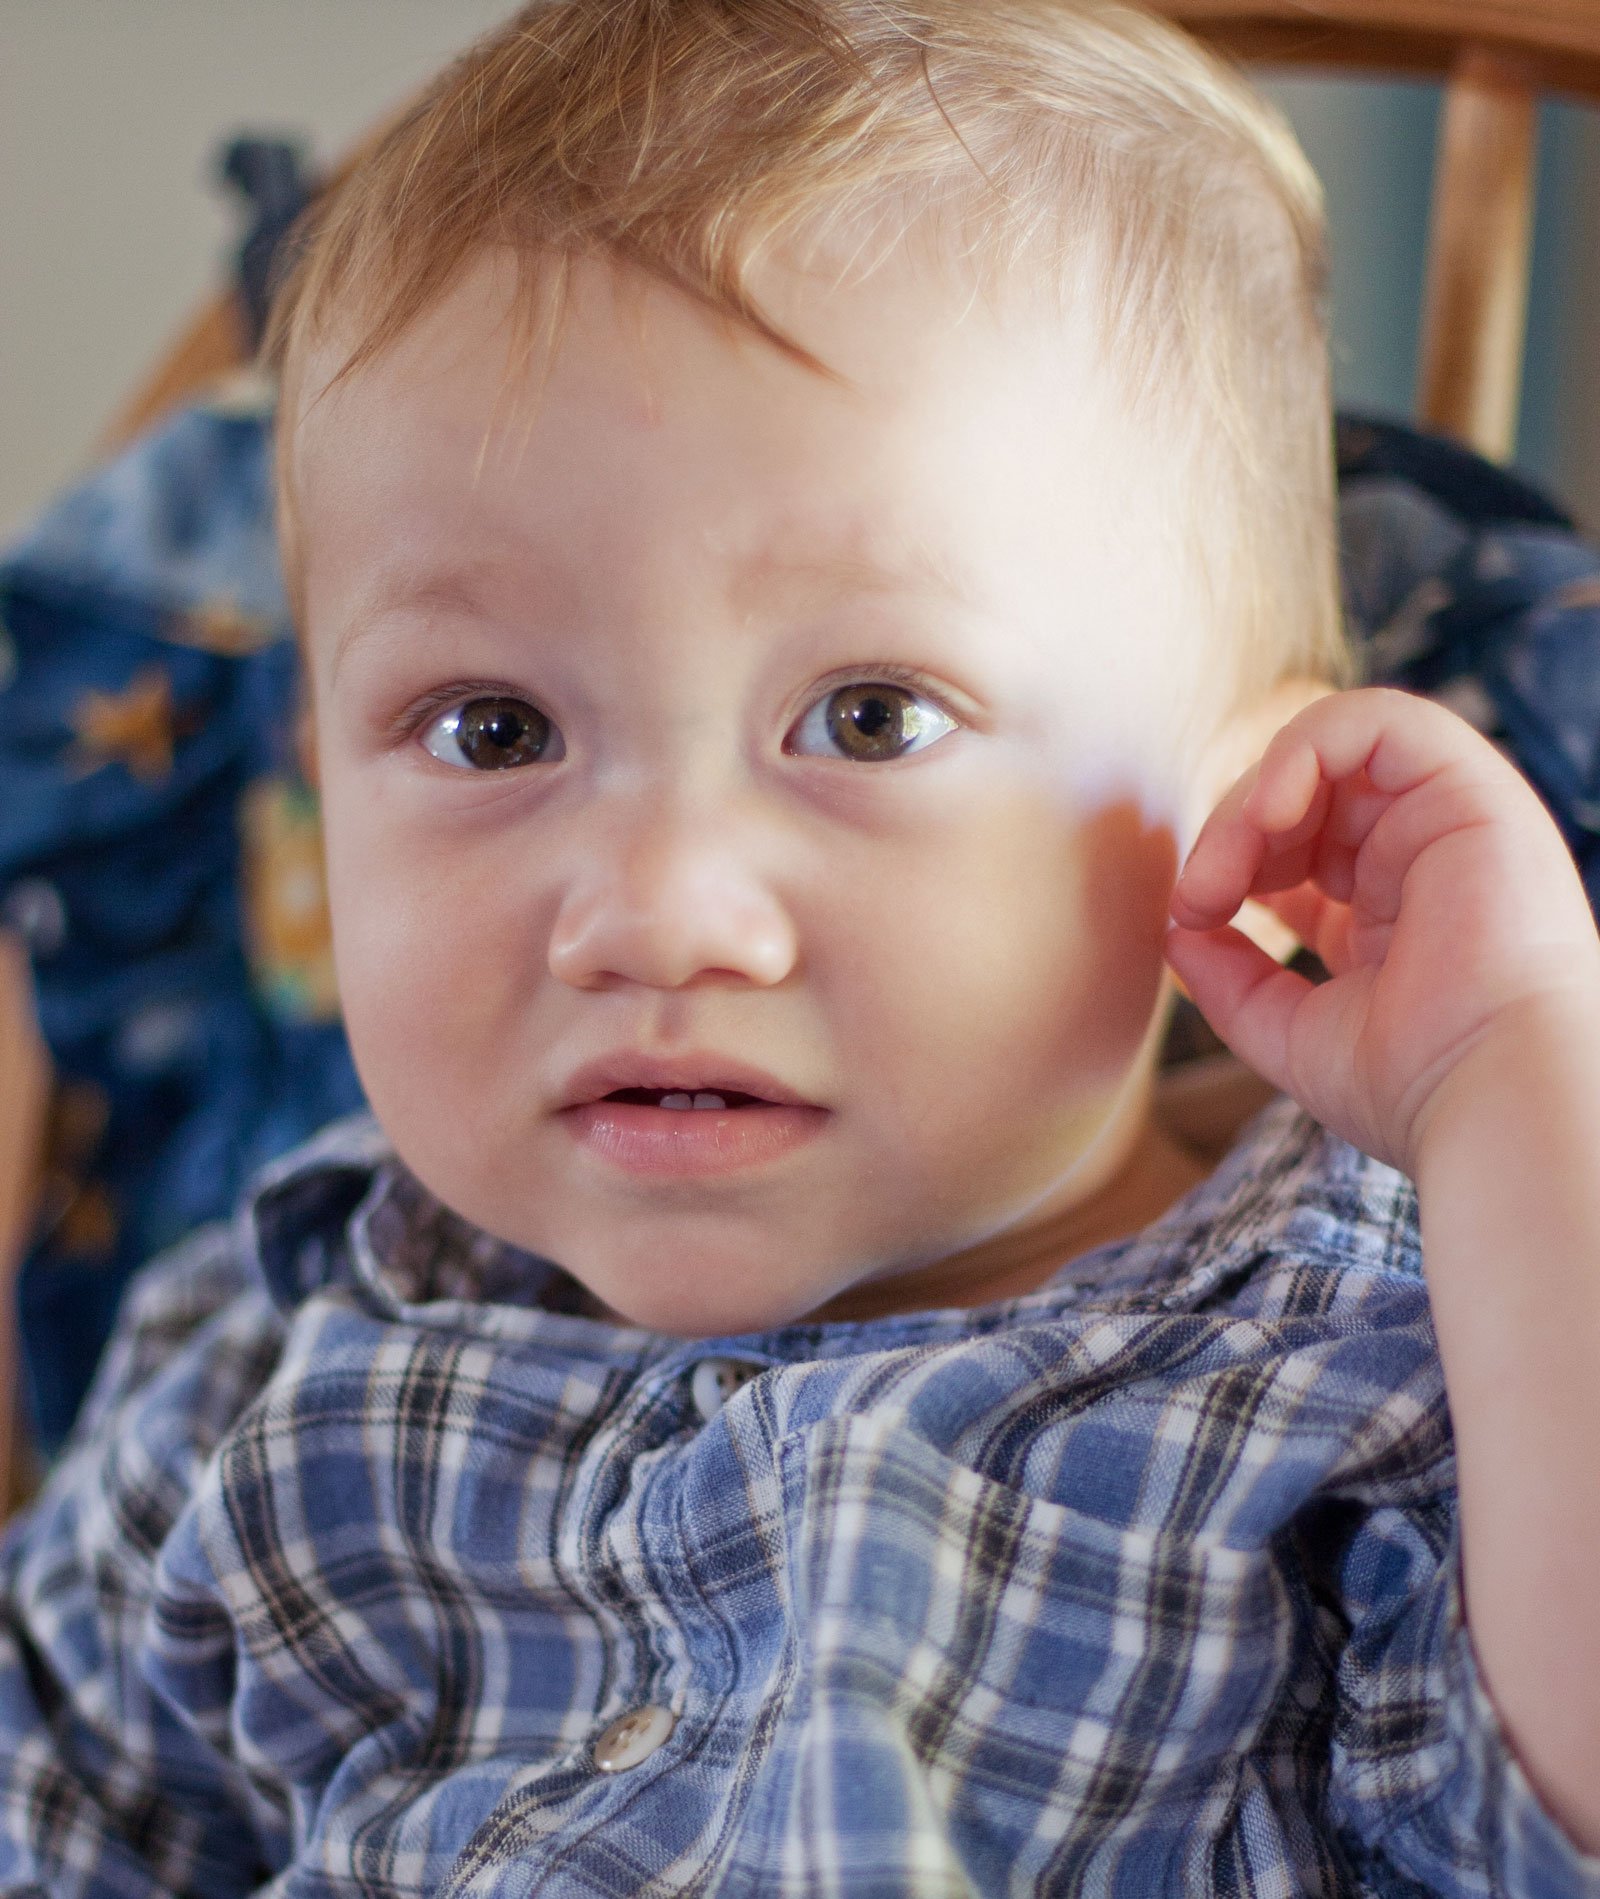 Things You Should Know about Ear Infections